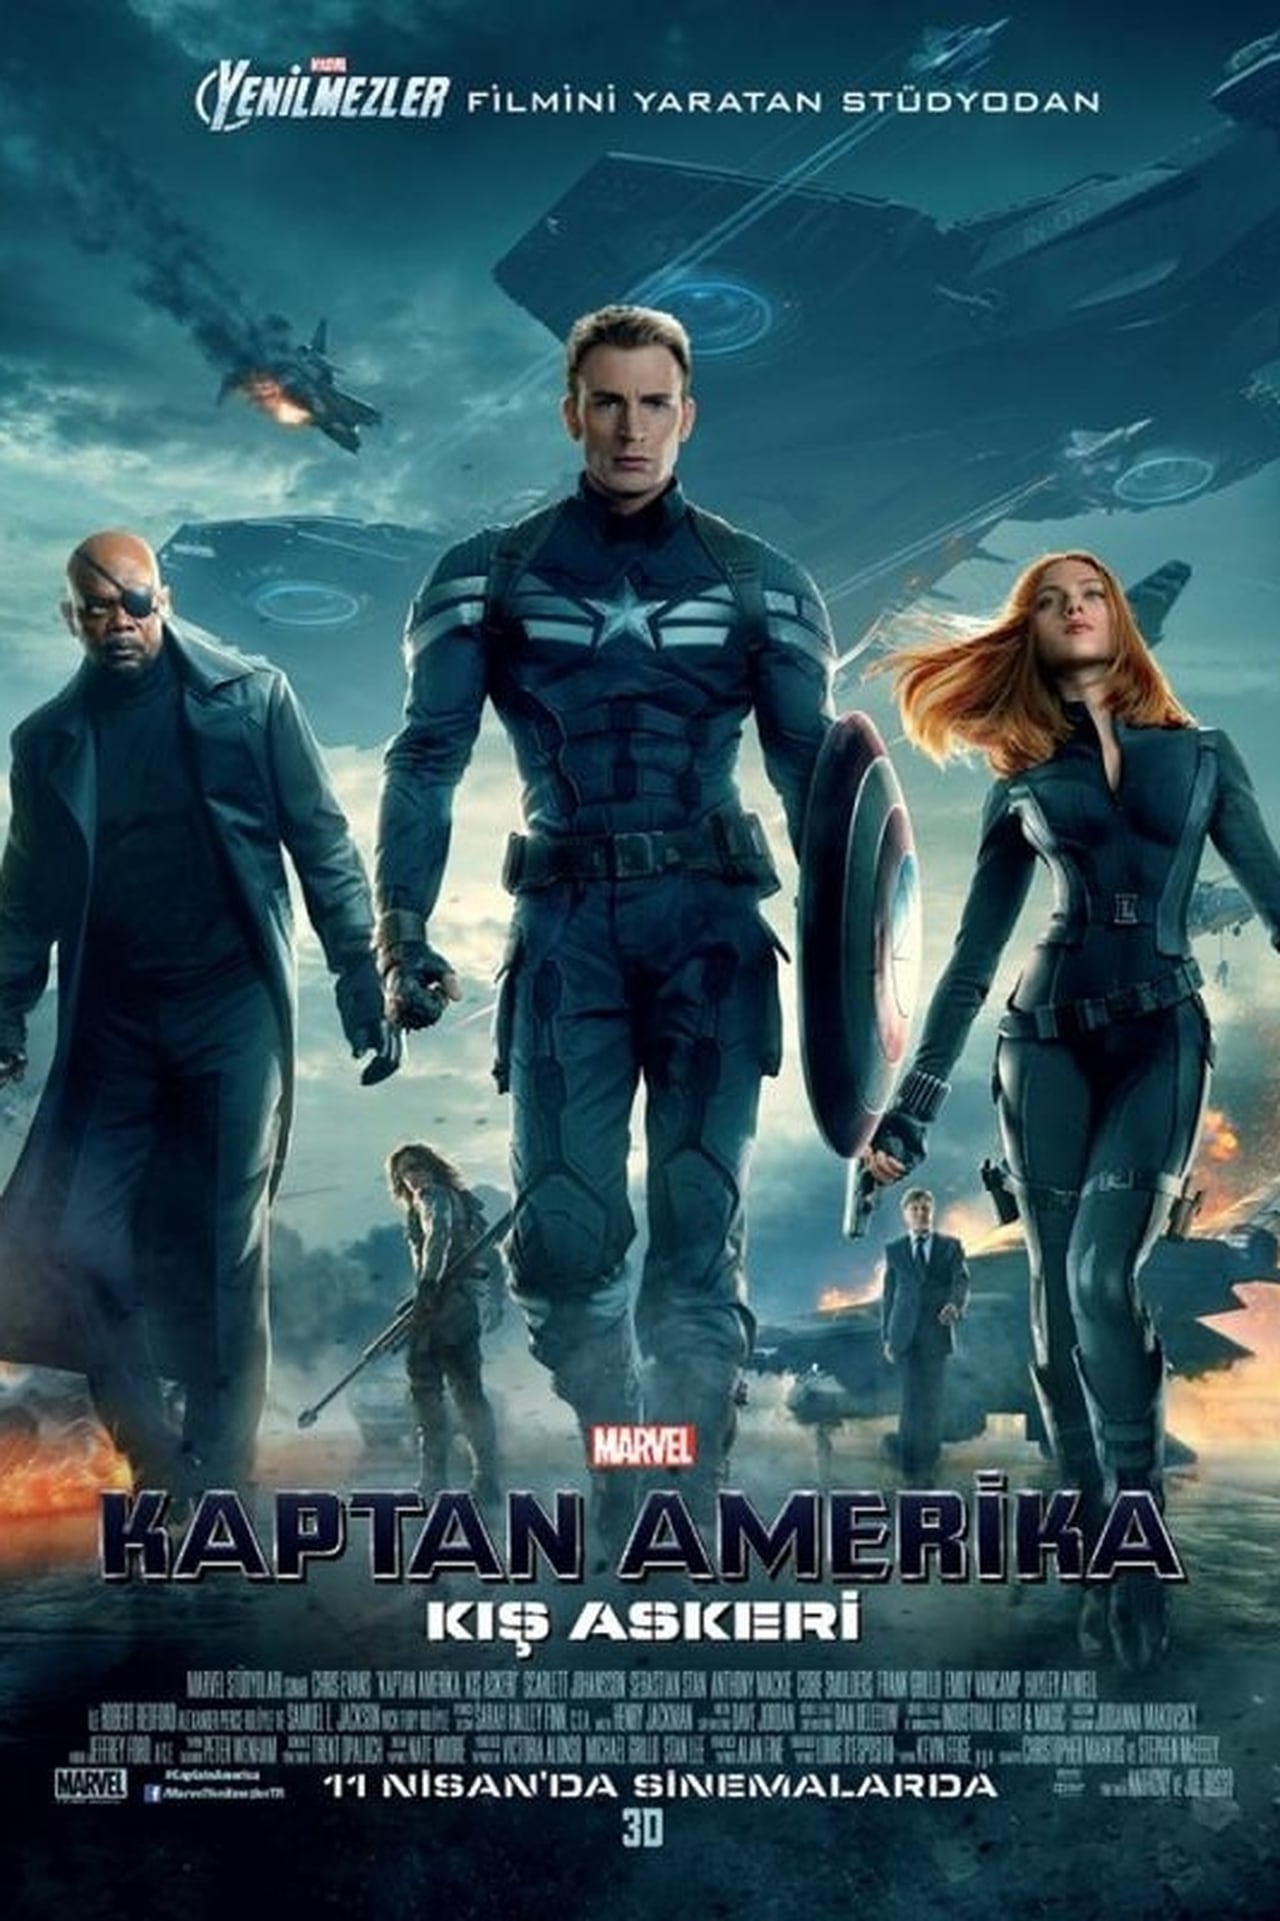 Captain America: The Winter Soldier (2014) 640Kbps 23.976Fps 48Khz 5.1Ch BluRay Turkish Audio TAC